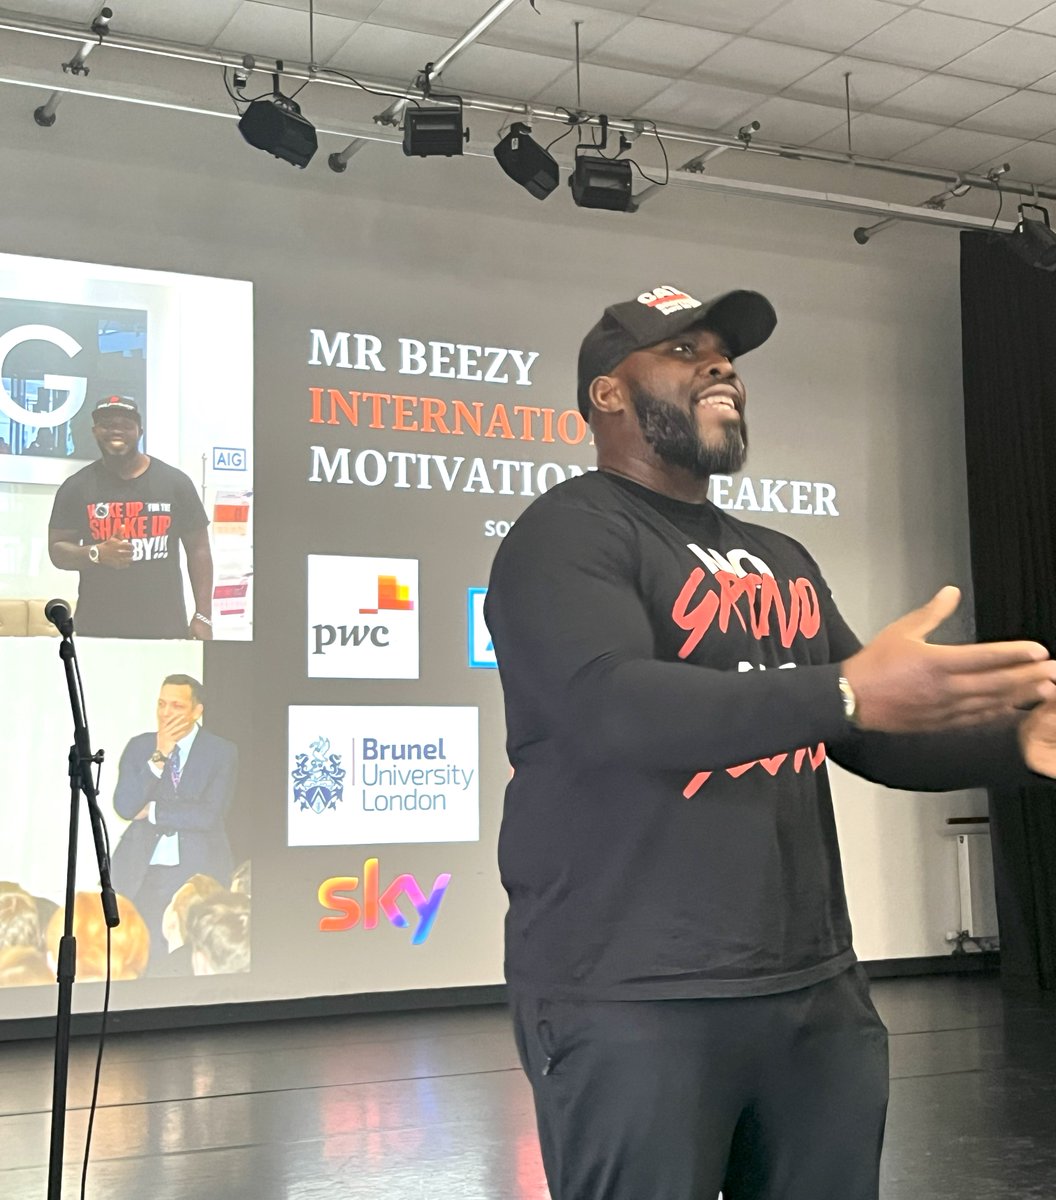 🌟Yesterday, we had the pleasure of hosting #nextsteps, an event organized by the #Elmbridge consortium, aimed at guiding Year 10s from local schools through the array of options available for education and employment after GCSEs. @thereal_mrbeezy #YourEsher